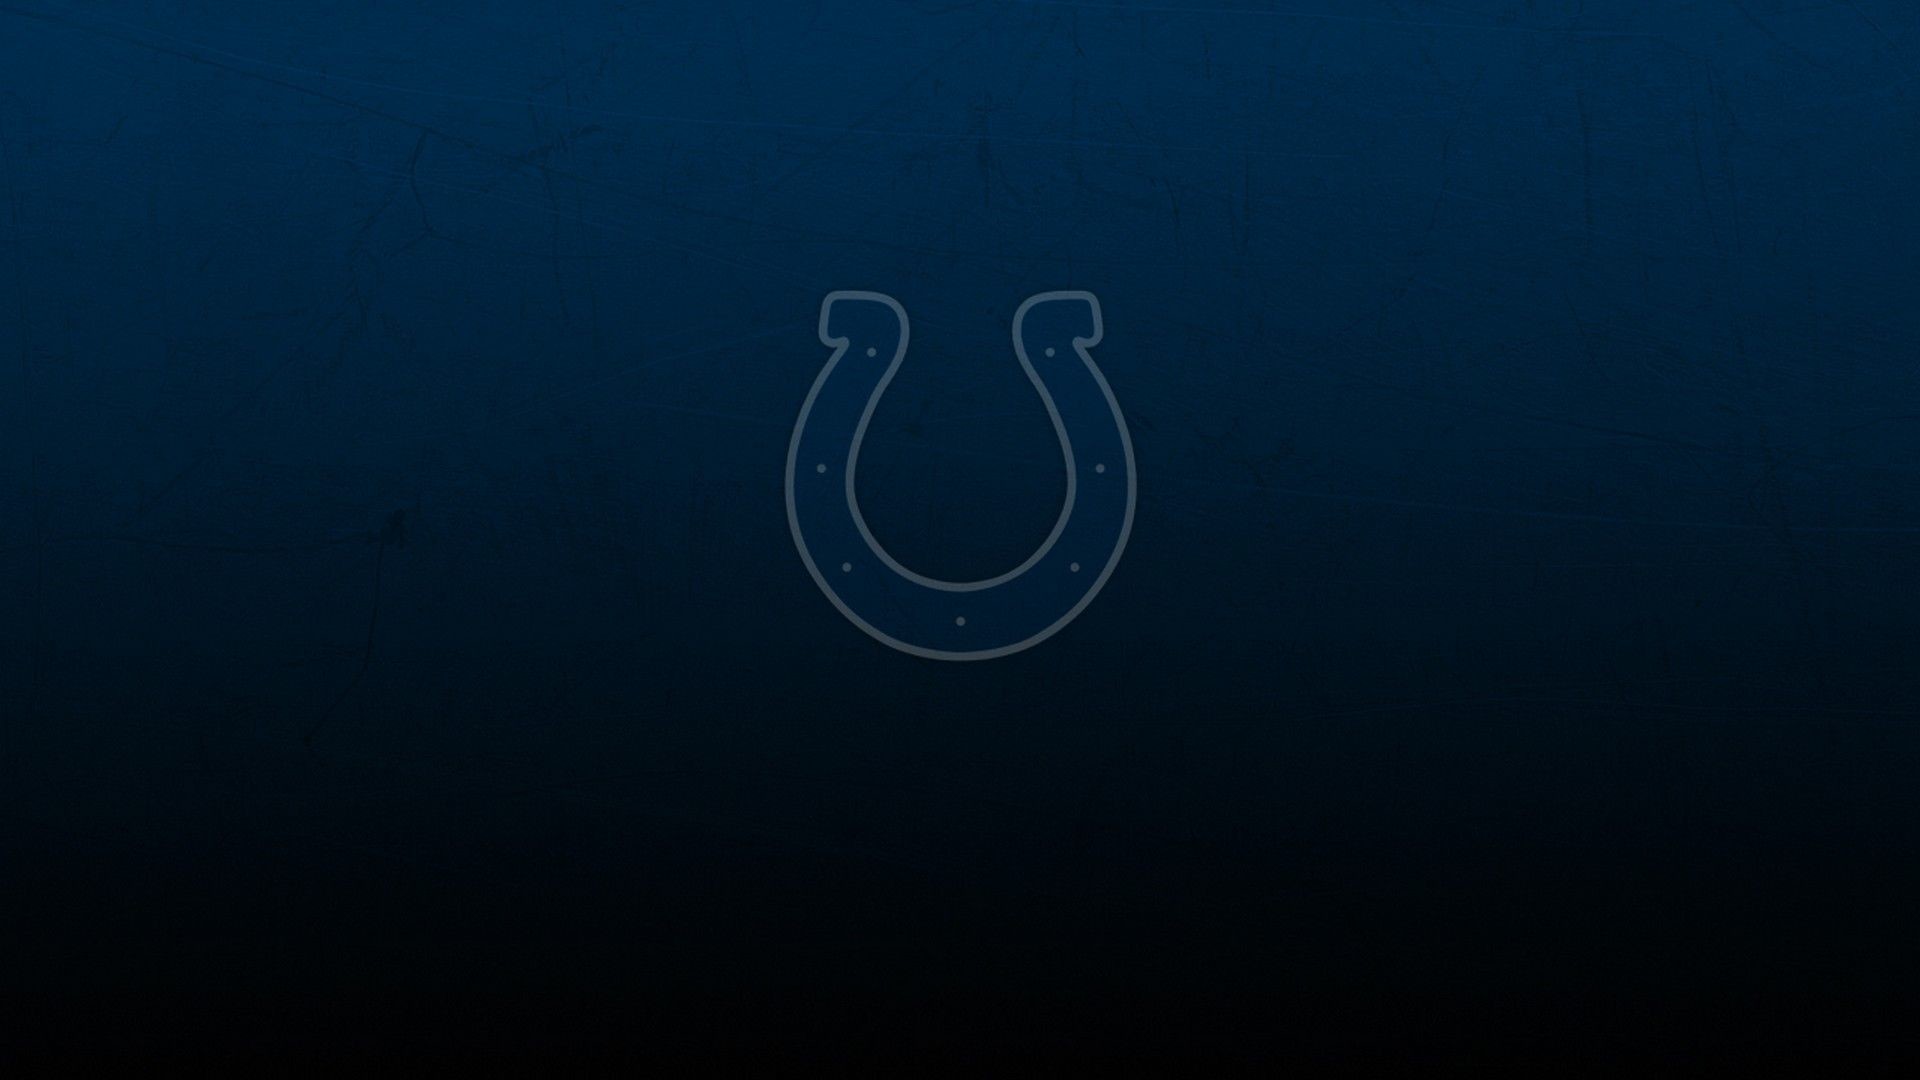 1920x1080 Wallpapers Indianapolis Colts | Best NFL Wallpapers